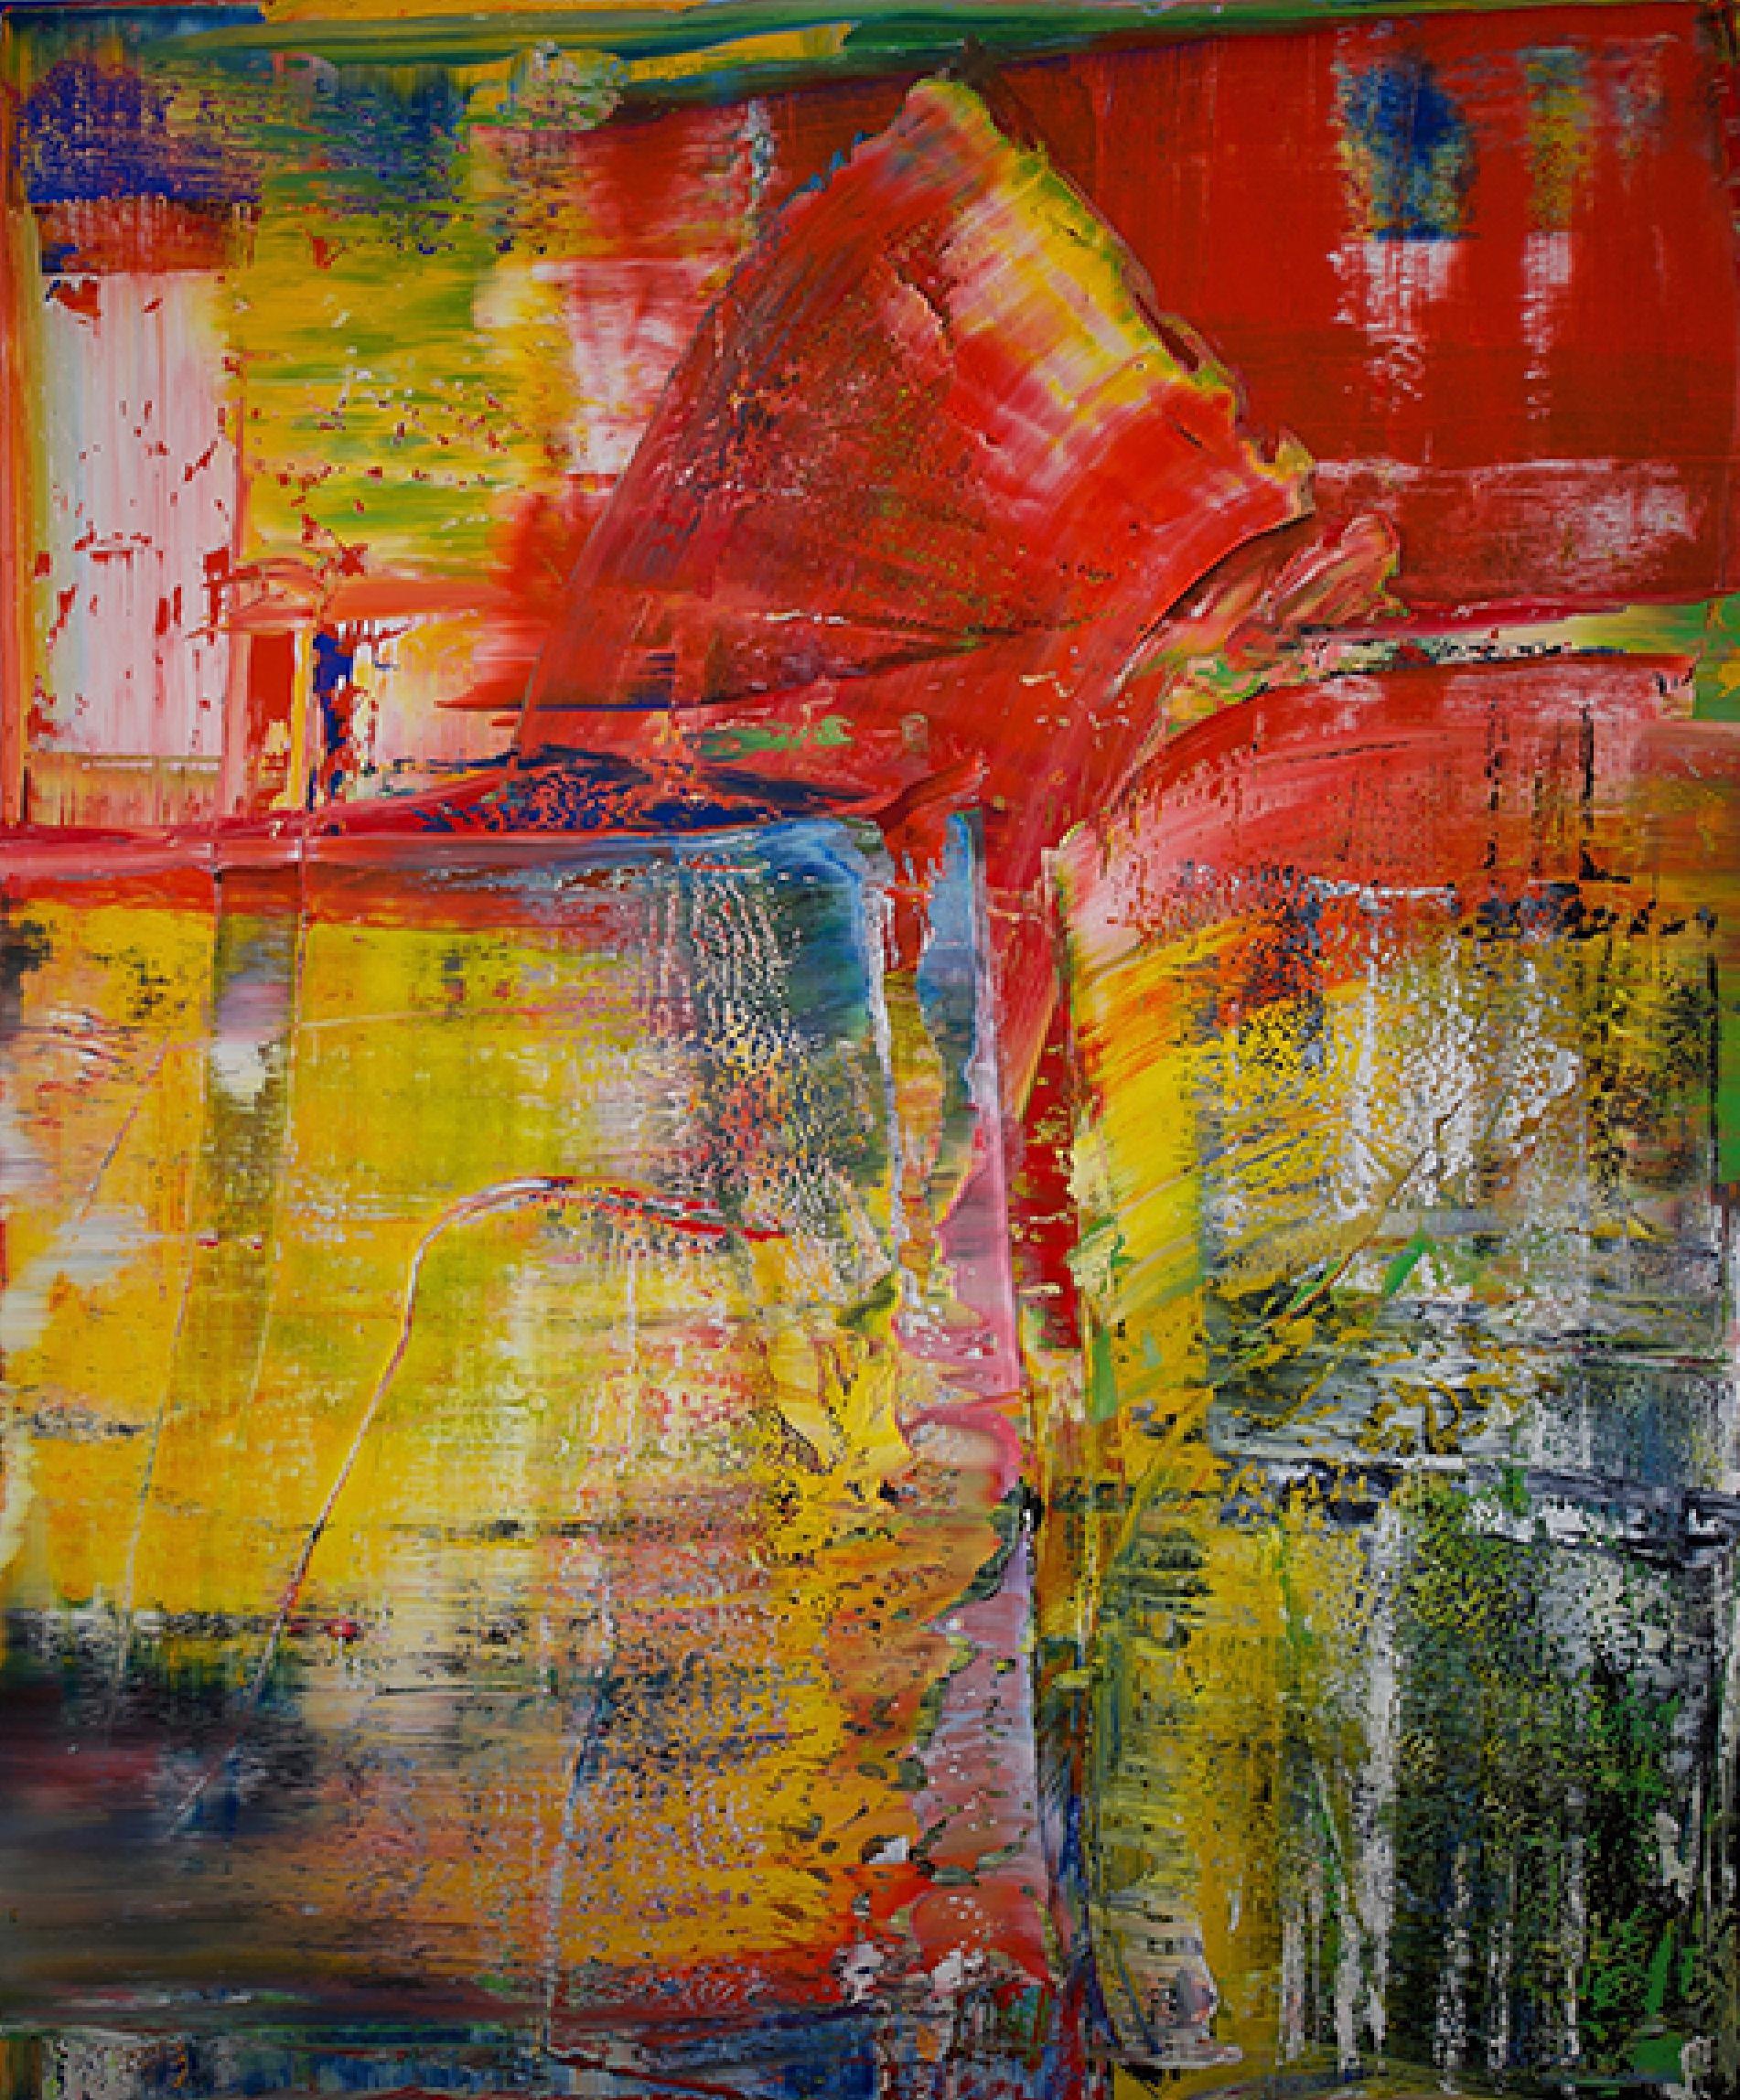 Abstract Painting Harry James Moody - rouge et jaune abstrait #472 